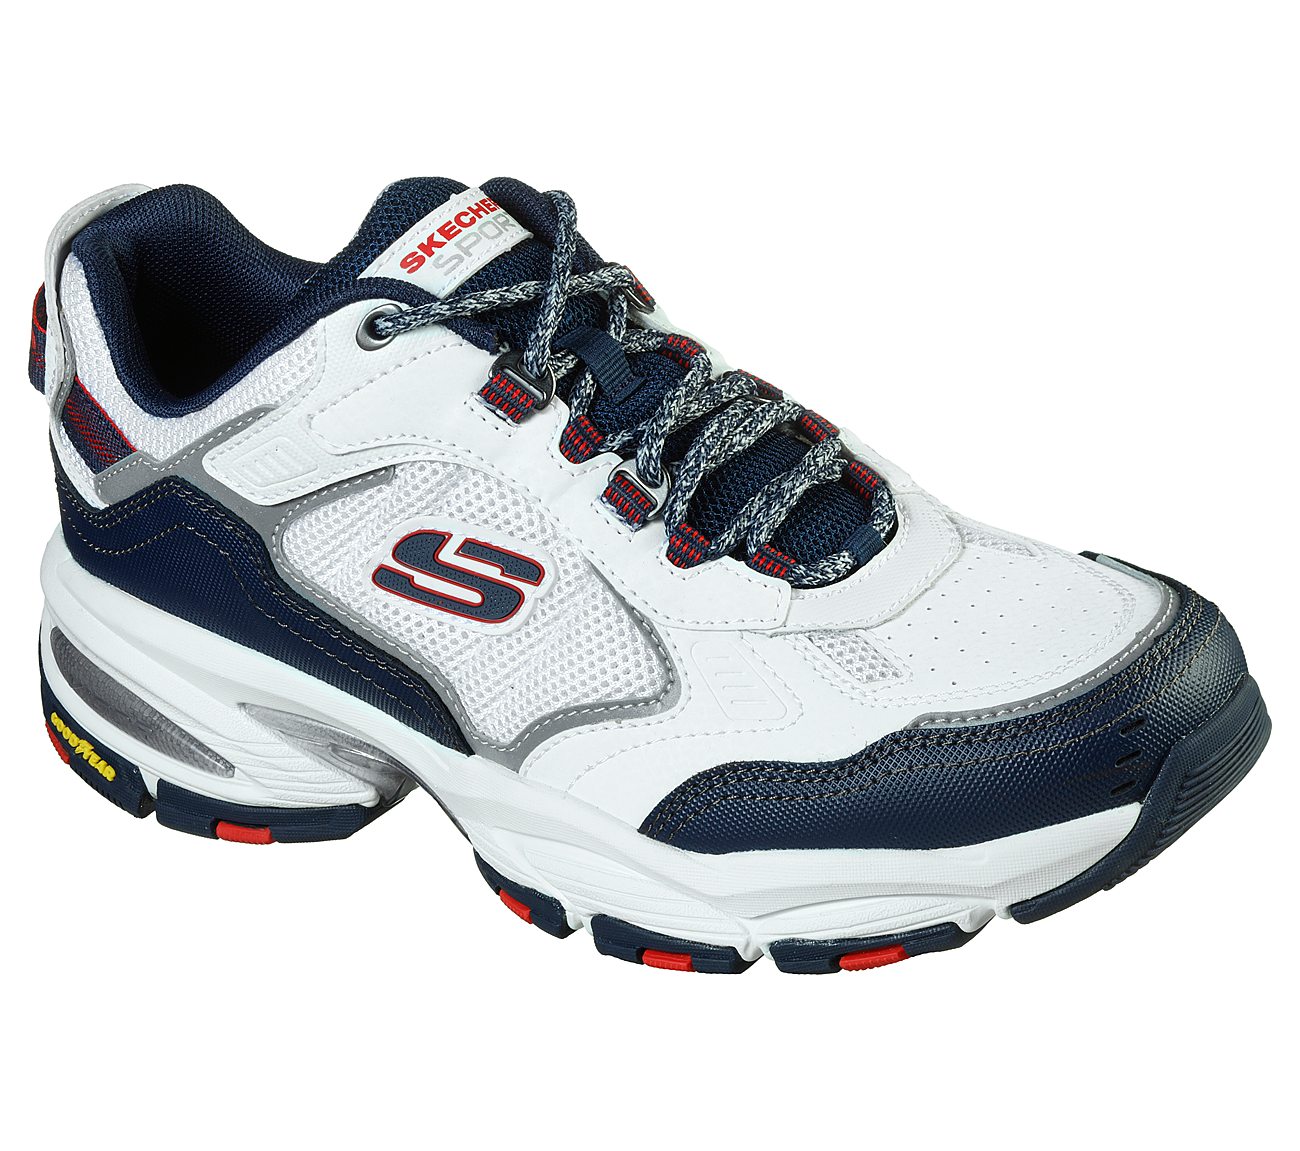 VIGOR 3, WHITE/NAVY/RED Footwear Right View